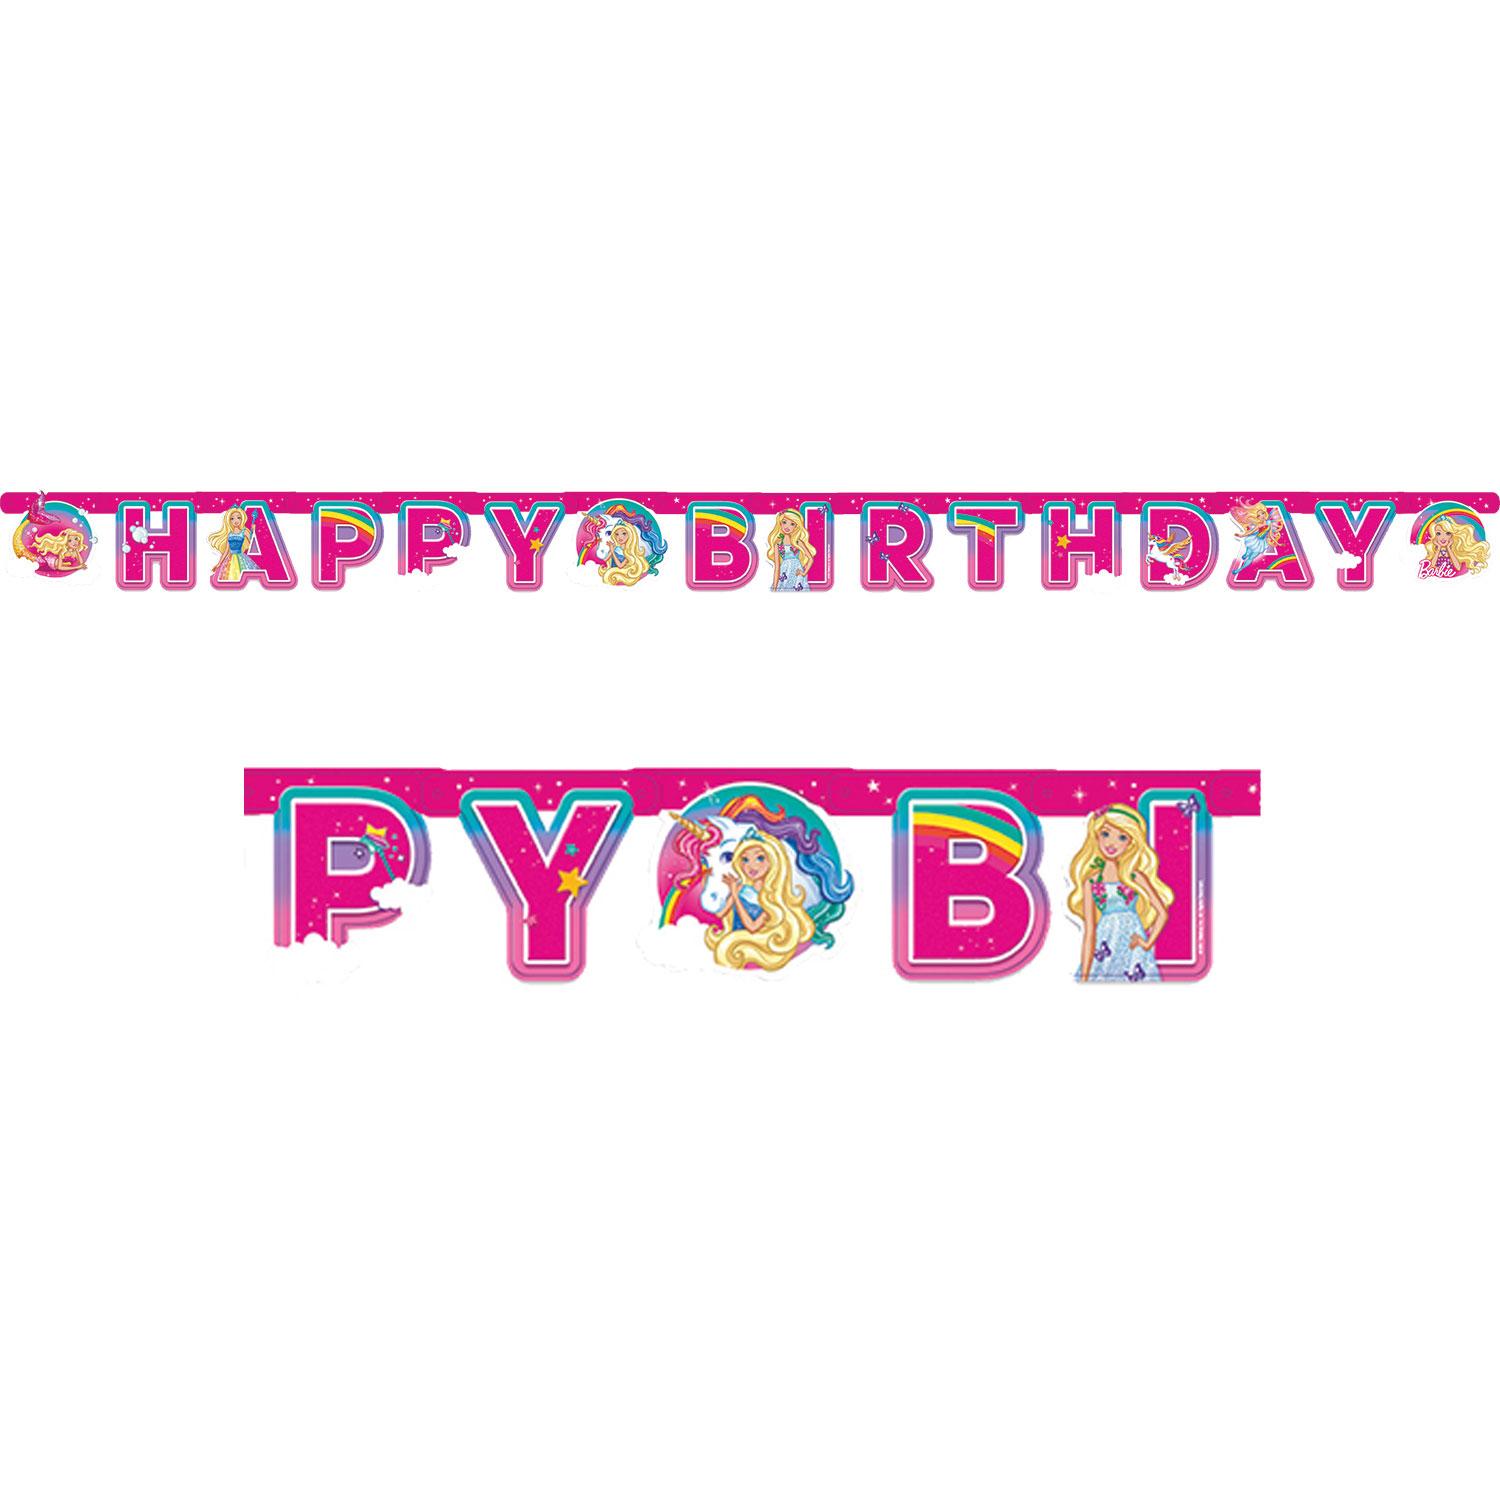 Barbie Dreamtopia Happy Birthday Letter Banner 1.6m x 13cm by Amscan 9902529 availabe here at Karnival Costumes online party shop